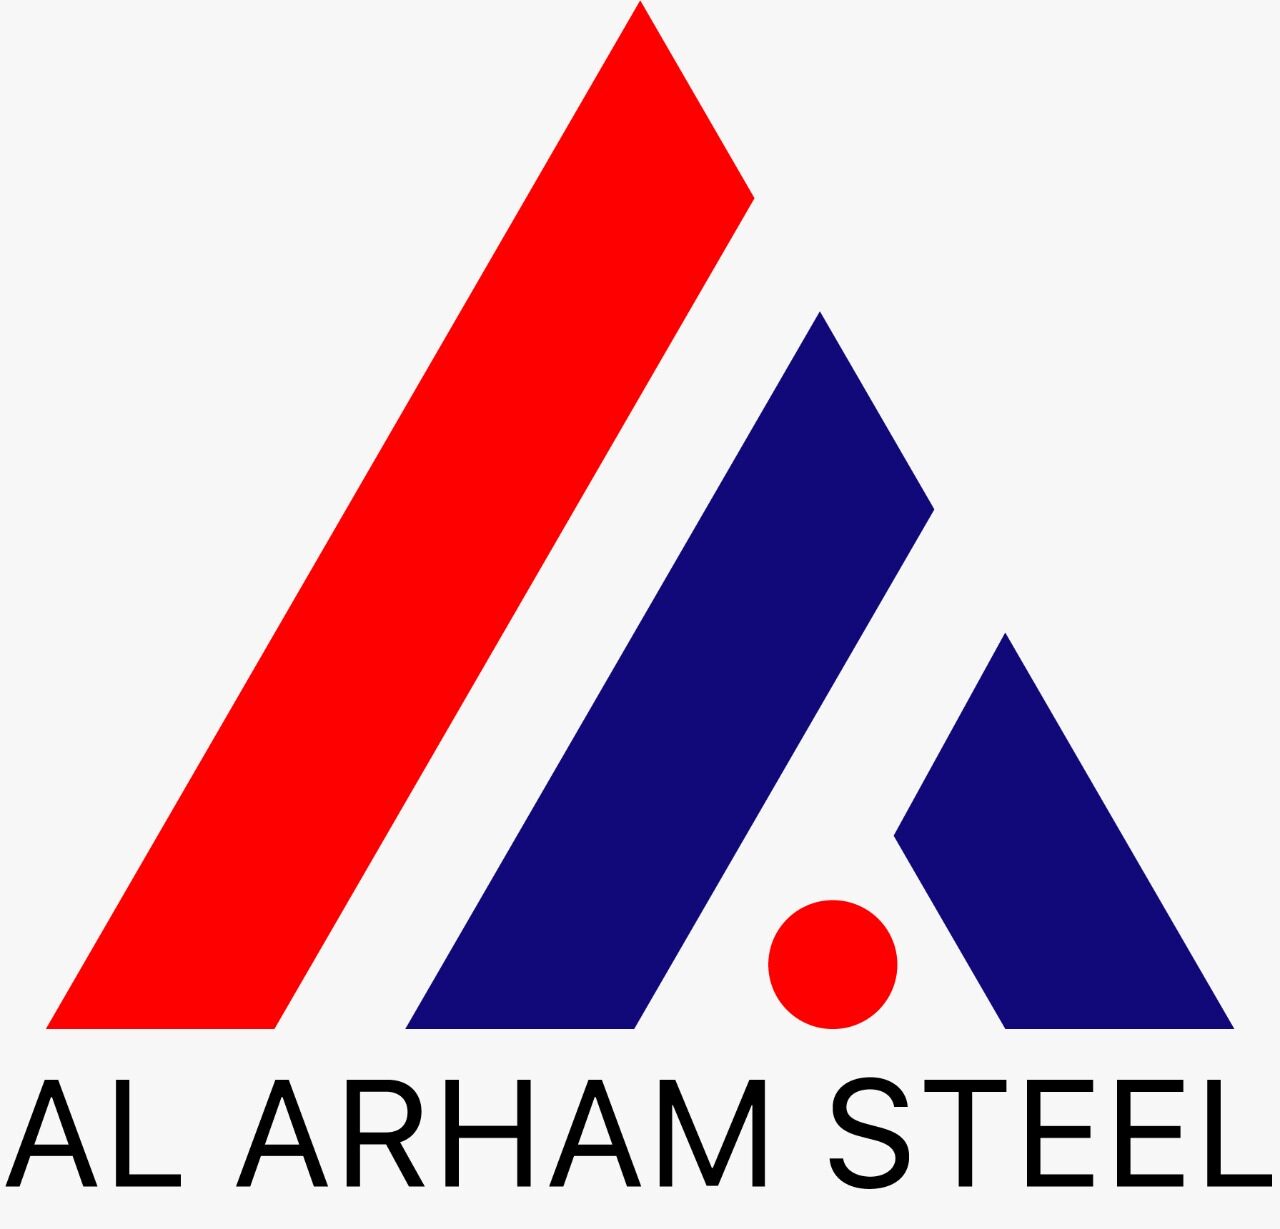 AL ARHAM STEEL AND POLYMER TRADING FZE